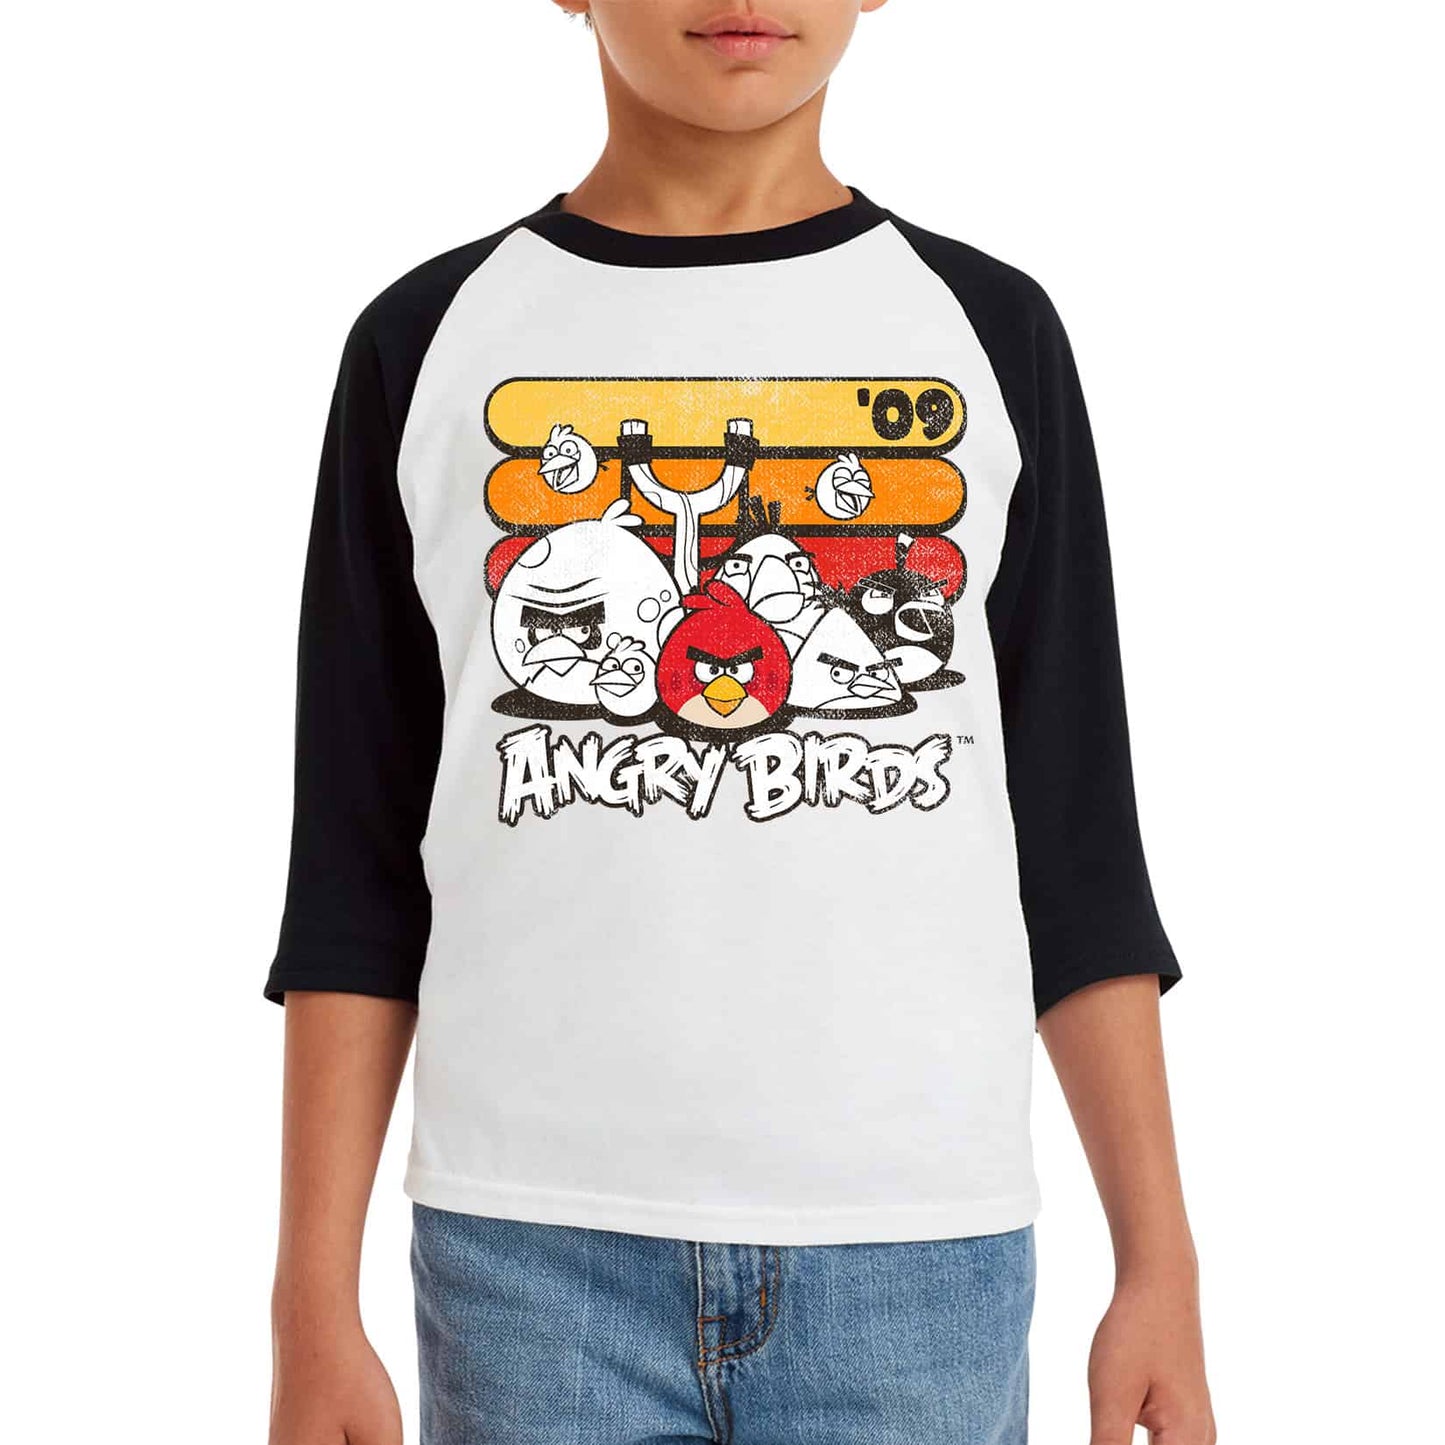 ANGRY BIRDS OFFICAIL LONG SLEEVE KIDS T-SHIRTS